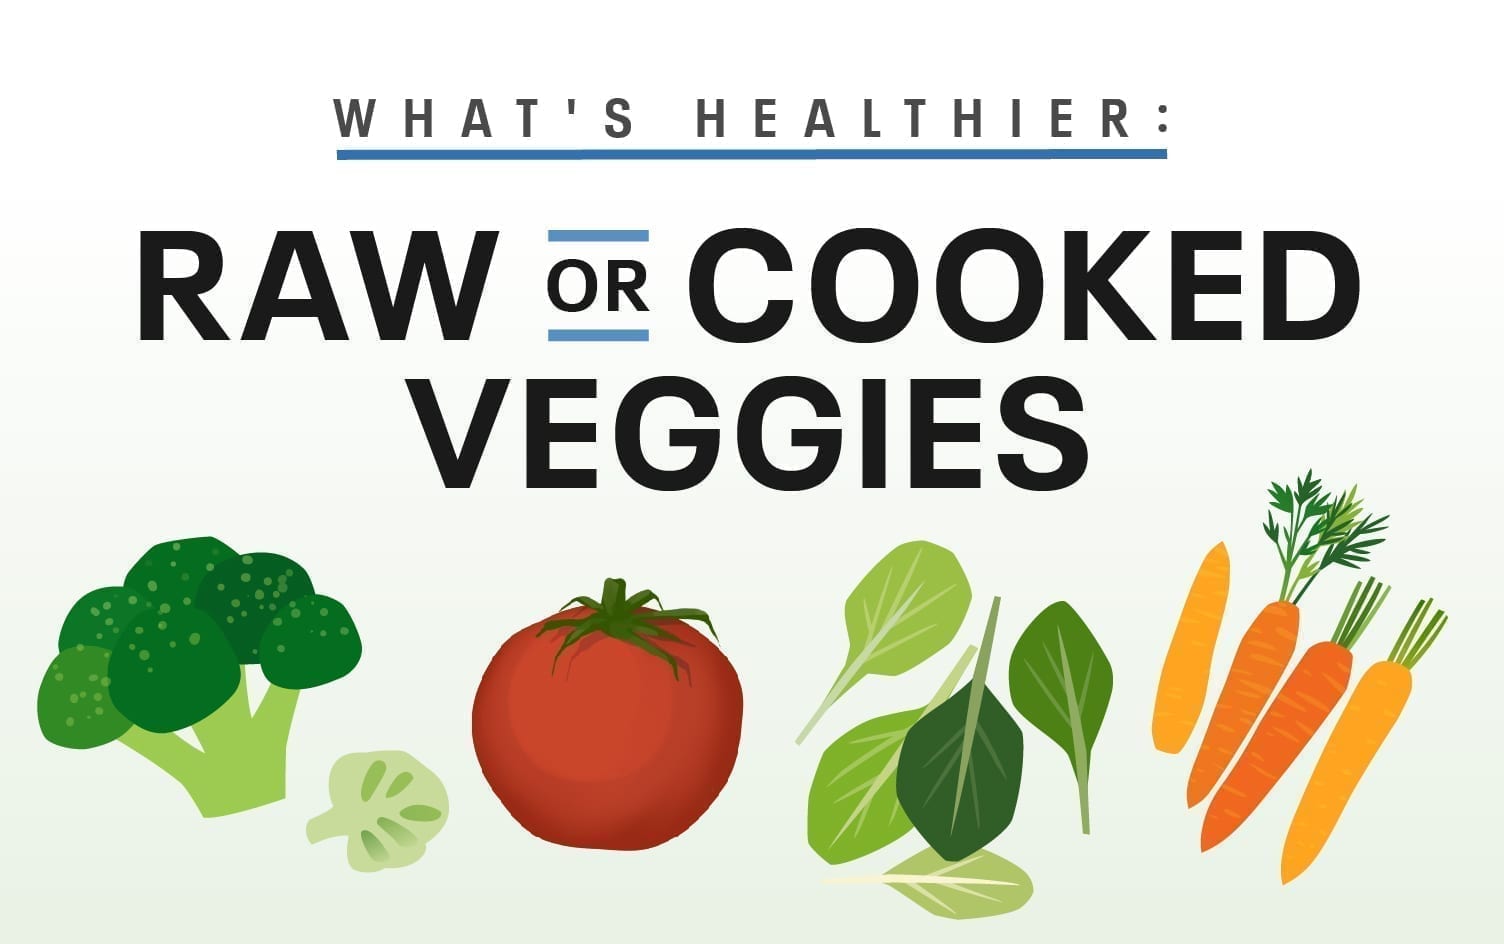 What’s Healthier: Raw or Cooked Veggies